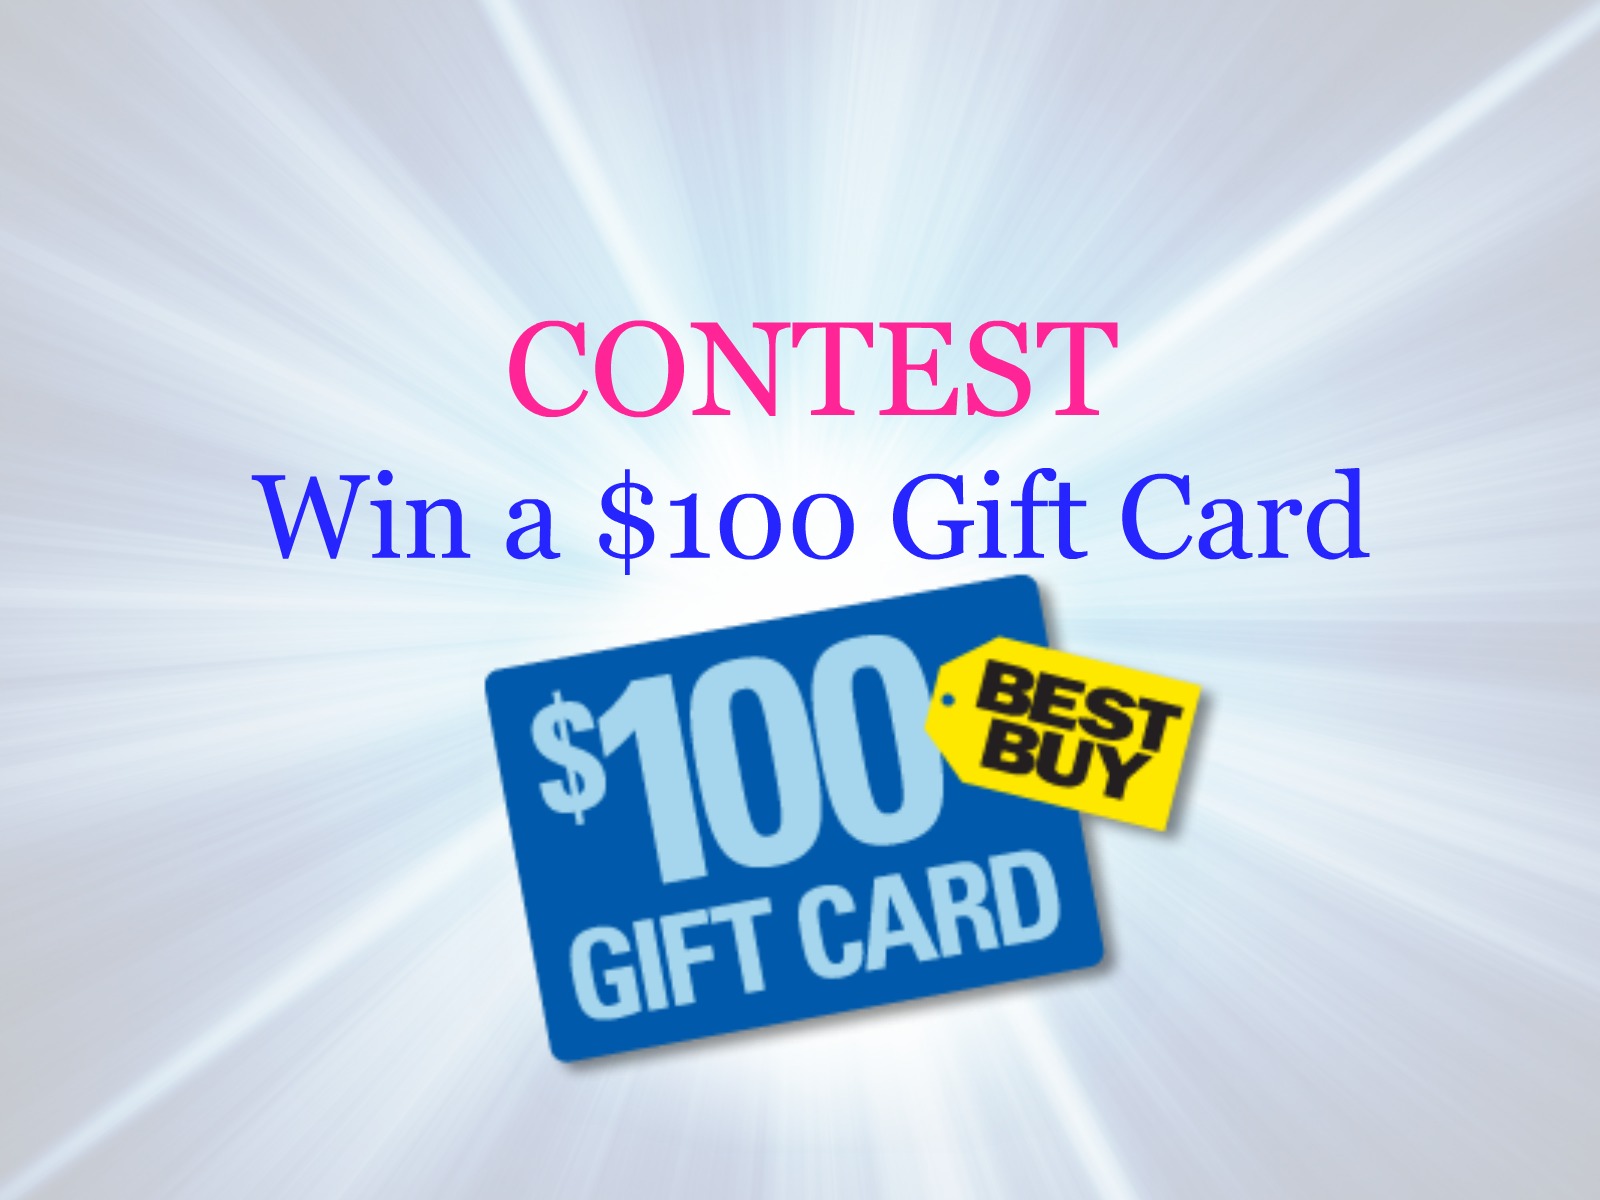 Contest 100 Best Buy Gift Card Entertain Kids on a